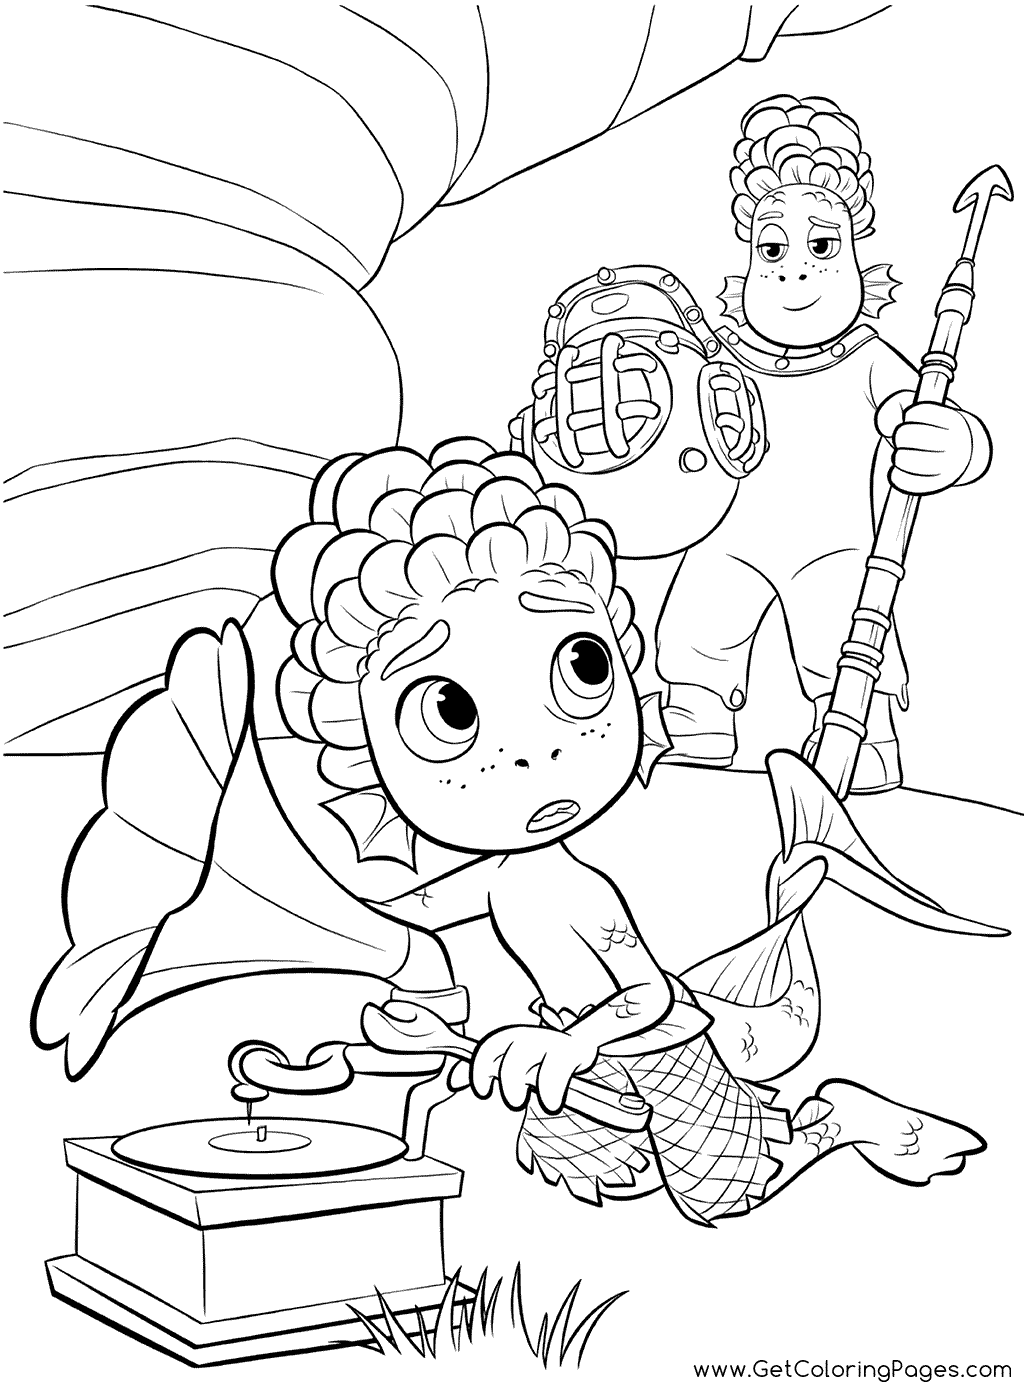 Free Printale Luca Coloring Pages for Kids & Adults